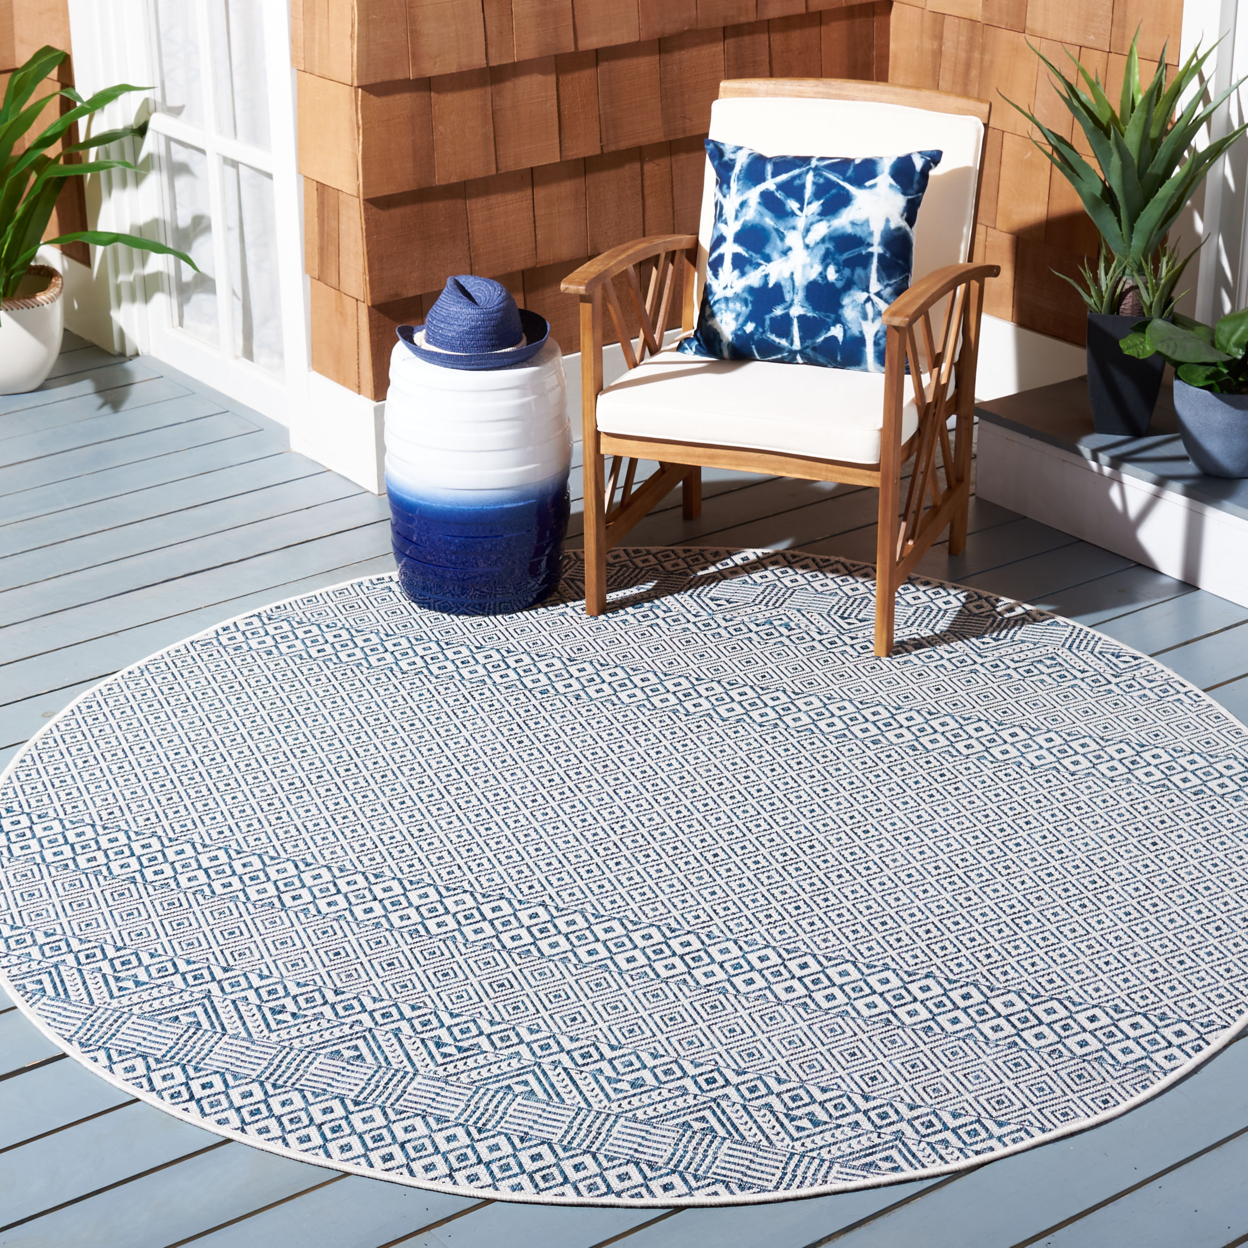 SAFAVIEH Outdoor CY8235-53412 Courtyard Blue / Navy Rug - 10' X 10' Square